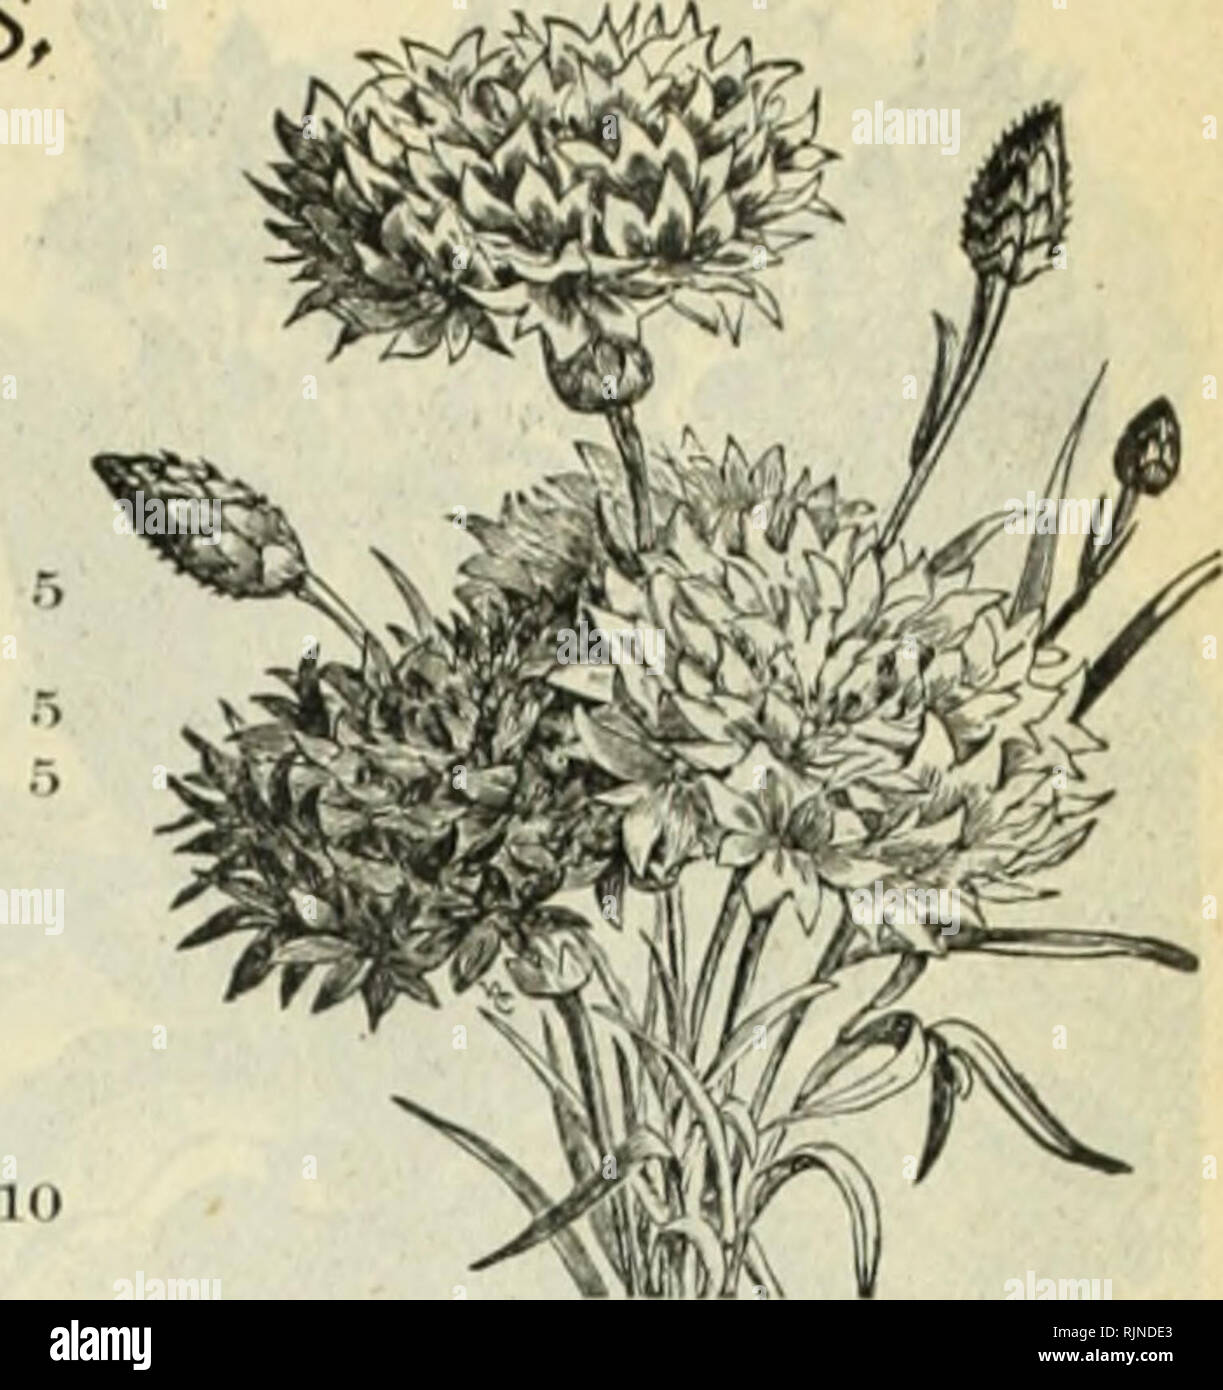 . A. W. Livingston's Sons annual of true blue seeds. Seeds Catalogs; Seed industry and trade Ohio Columbus Catalogs; Vegetables Ohio Columbus Catalogs; Fruit Ohio Columbus Catalogs; Flowers Ohio Columbus Catalogs. CENTAUREA CYANUS, or BACHELOR'S BUTTON. (Corn Flower, Blue Bottle, Ragged Sailor, etc. âVery old favorite bard? annual; flowers freely in almost any situation; for cut flowers they are largely used botb in Europe and this country, a little bunch of the blueÂ«torn Flower being n favorite boutoohiere. Cyanusâ I'uri WUili : very line 6 Cyanus &quot; llltitf.&quot; or Km/uror Flown: Fine Stock Photo